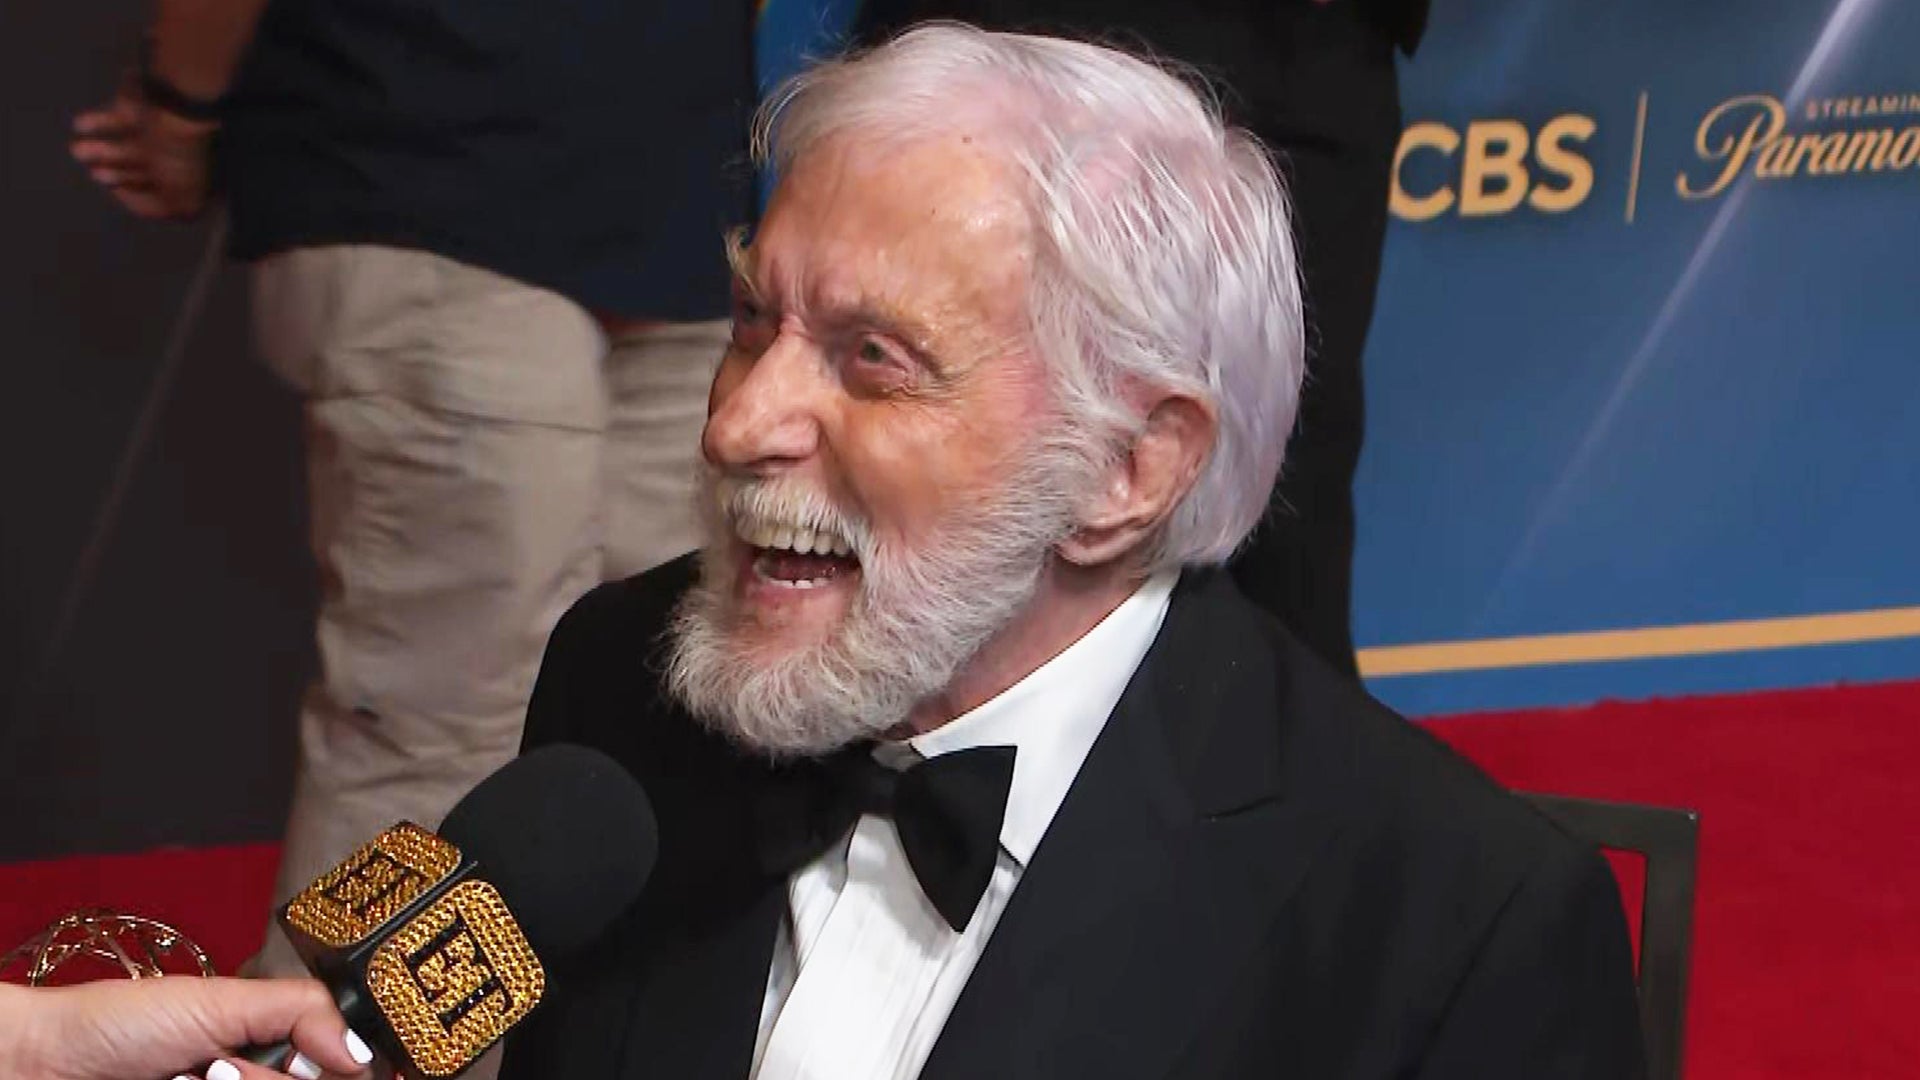 Dick Van Dyke, 98, Is Determined to Become EGOT After Historic Emmy Win (Exclusive)